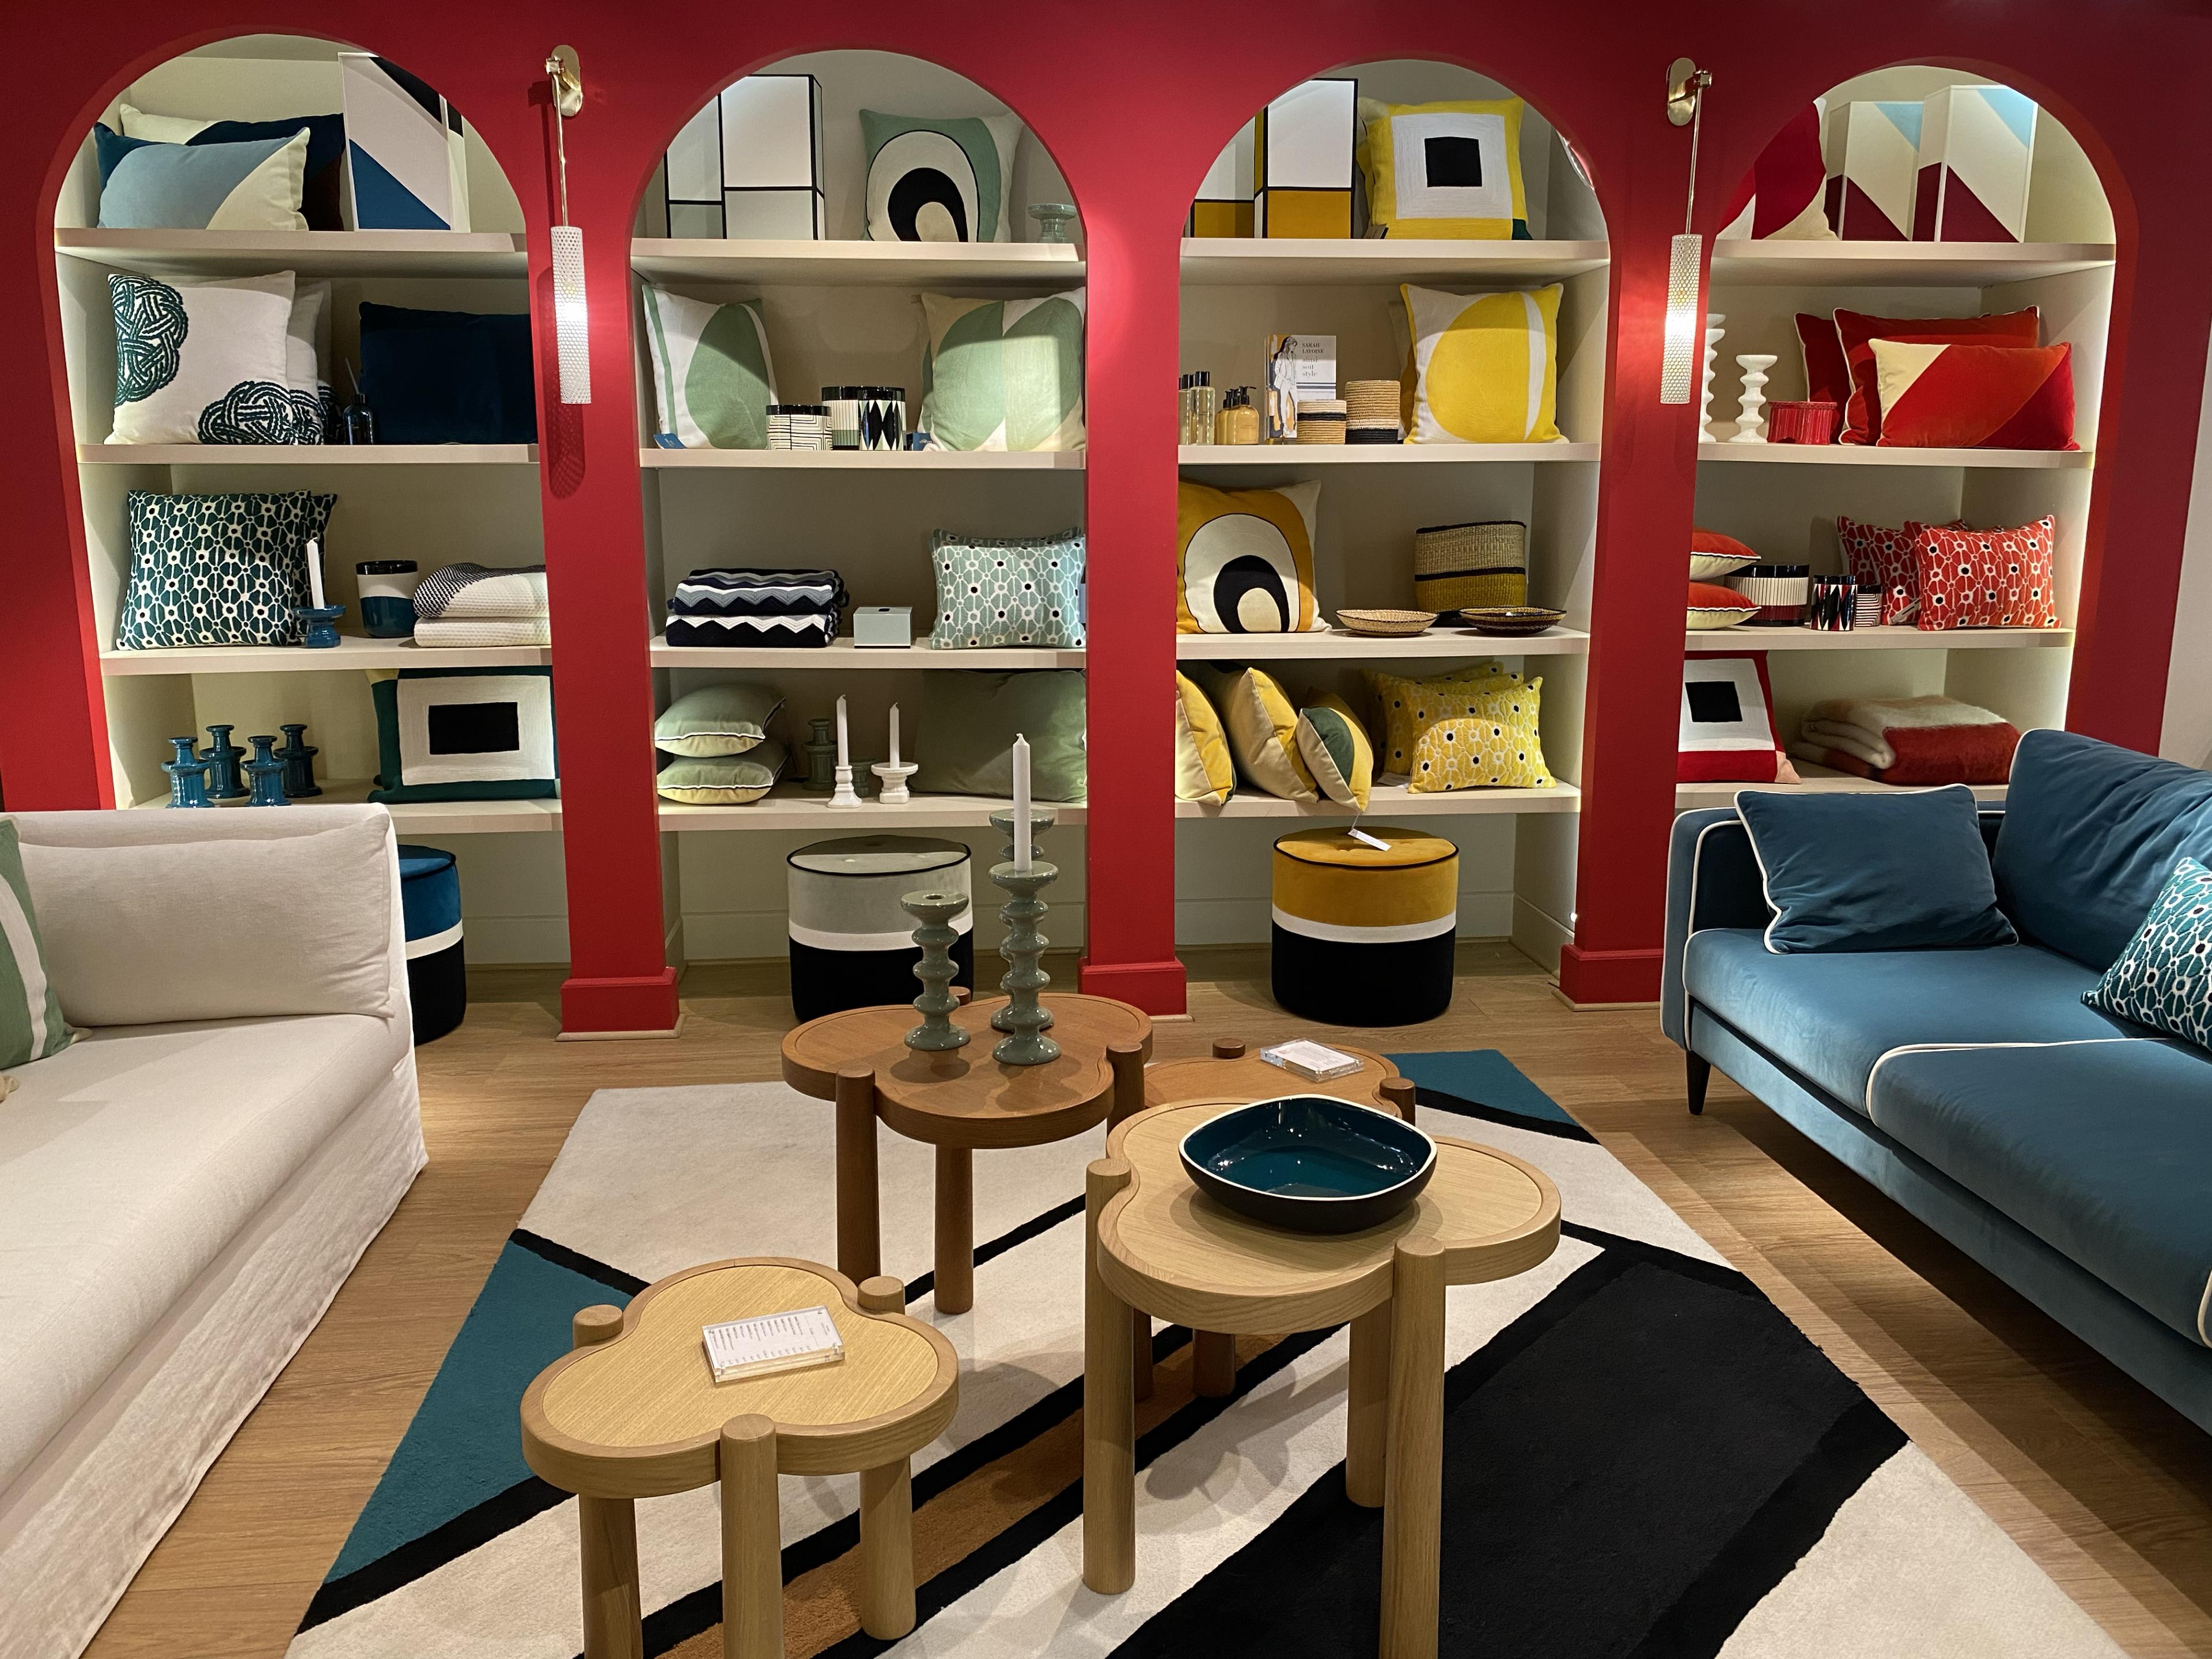 inside of a home interiors store with plates and glassware on display on built in shelves set along a red wall